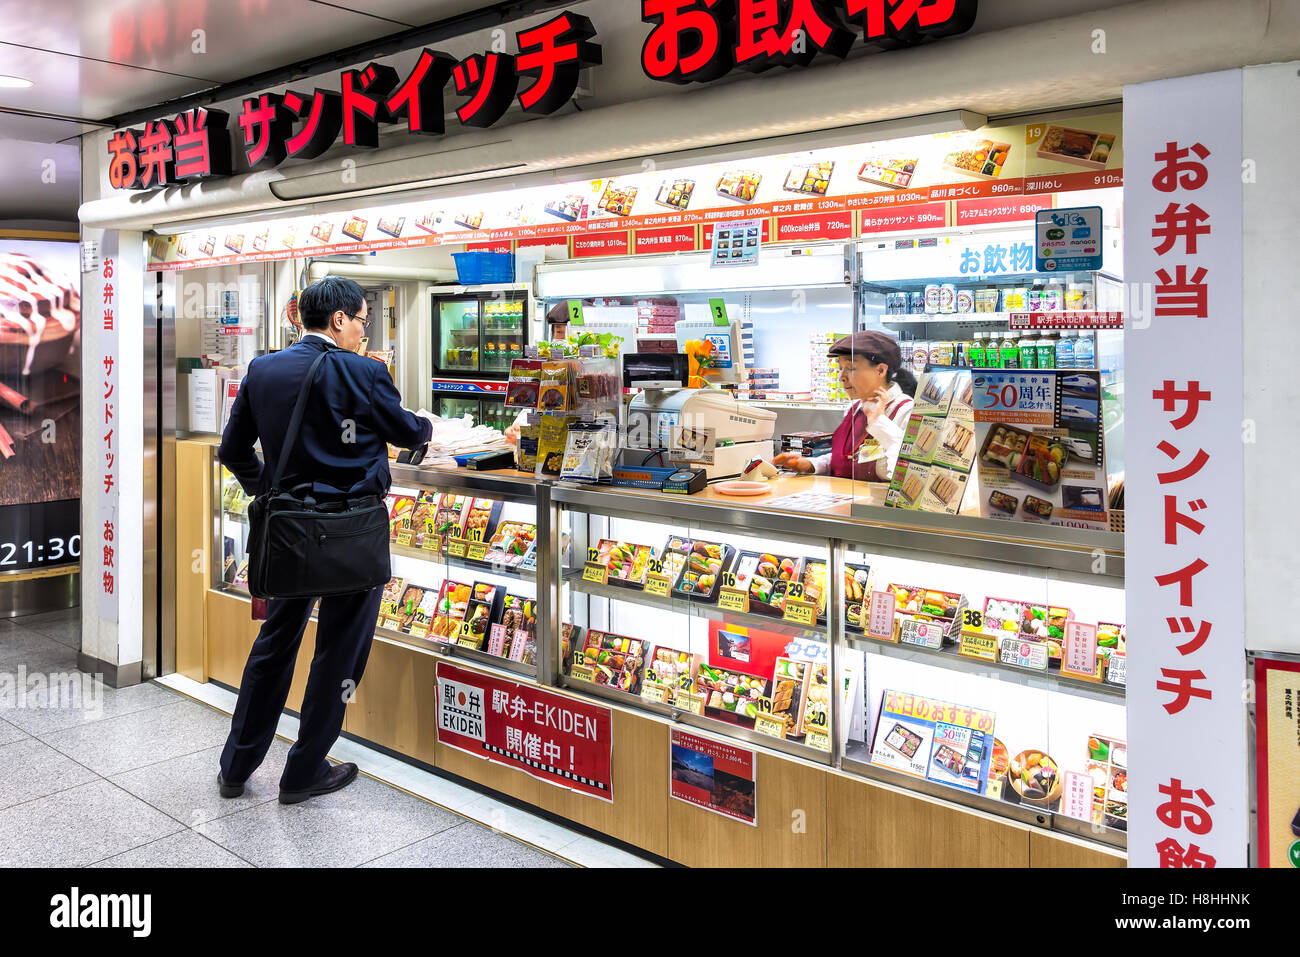 Tokyo, Japan - April 22, 2014: A Bento shop in Tokyo station, Japan. Bento is a single-portion takeout or home-packed meal Stock Photo